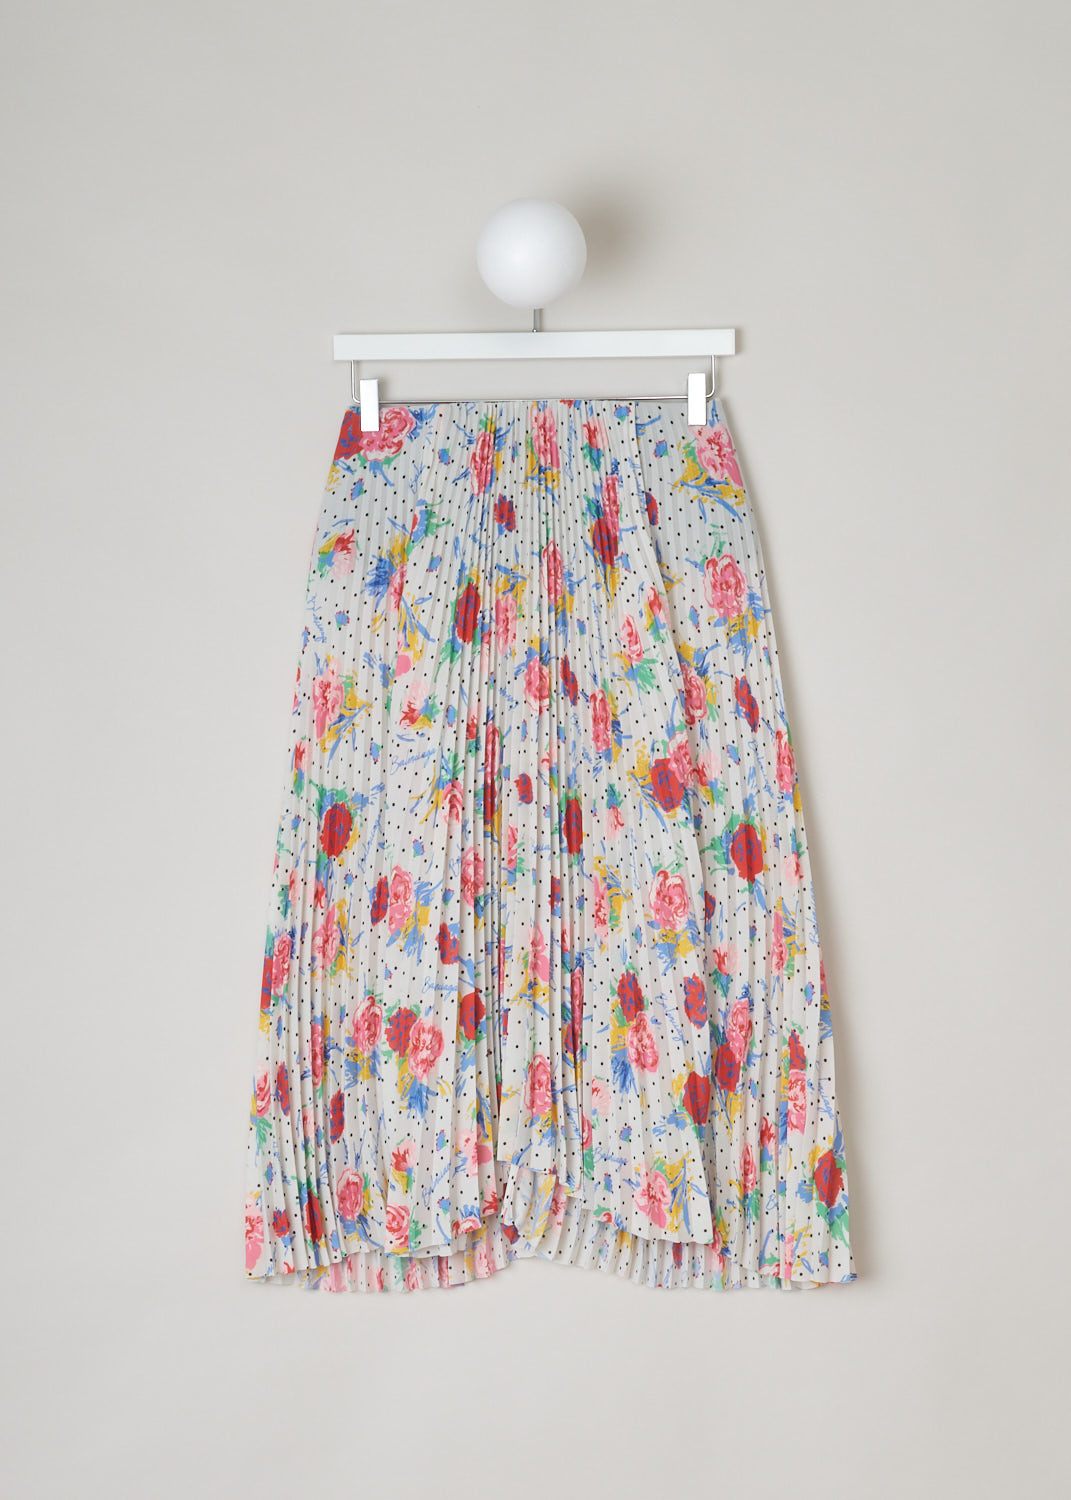 Balenciaga, Polka dot floral plissÃ© skirt, 601169_THL07_9701, white red yellow green blue, front. This high-waisted multi-colored plissÃ© skirt comes with a floral design pattern and polka dots through-out. The closure options on this piece are 2 metal hooks and beneath that a concealed zipper.